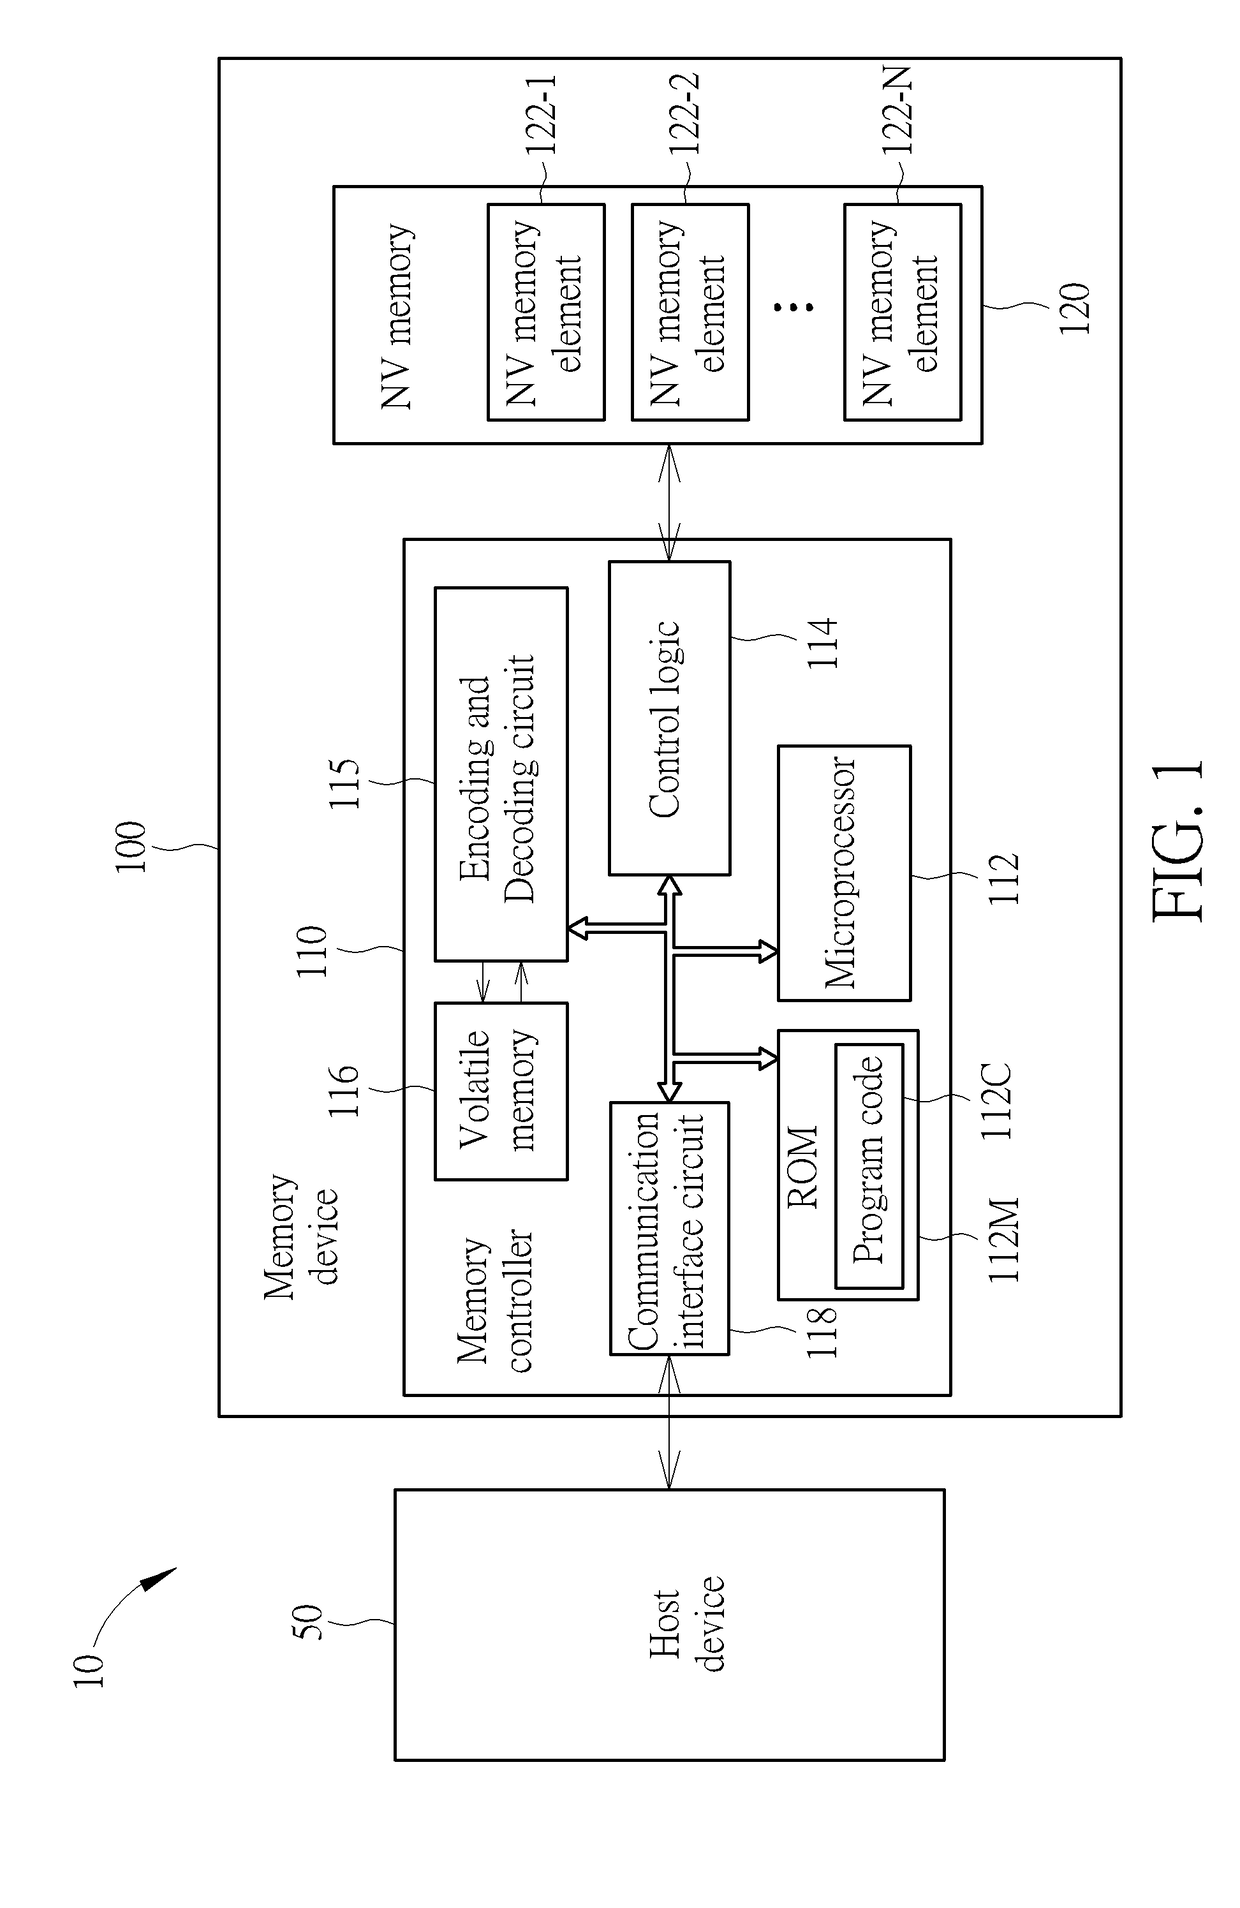 Method for performing data processing for error handling in memory device, associated memory device and controller thereof, and associated electronic device